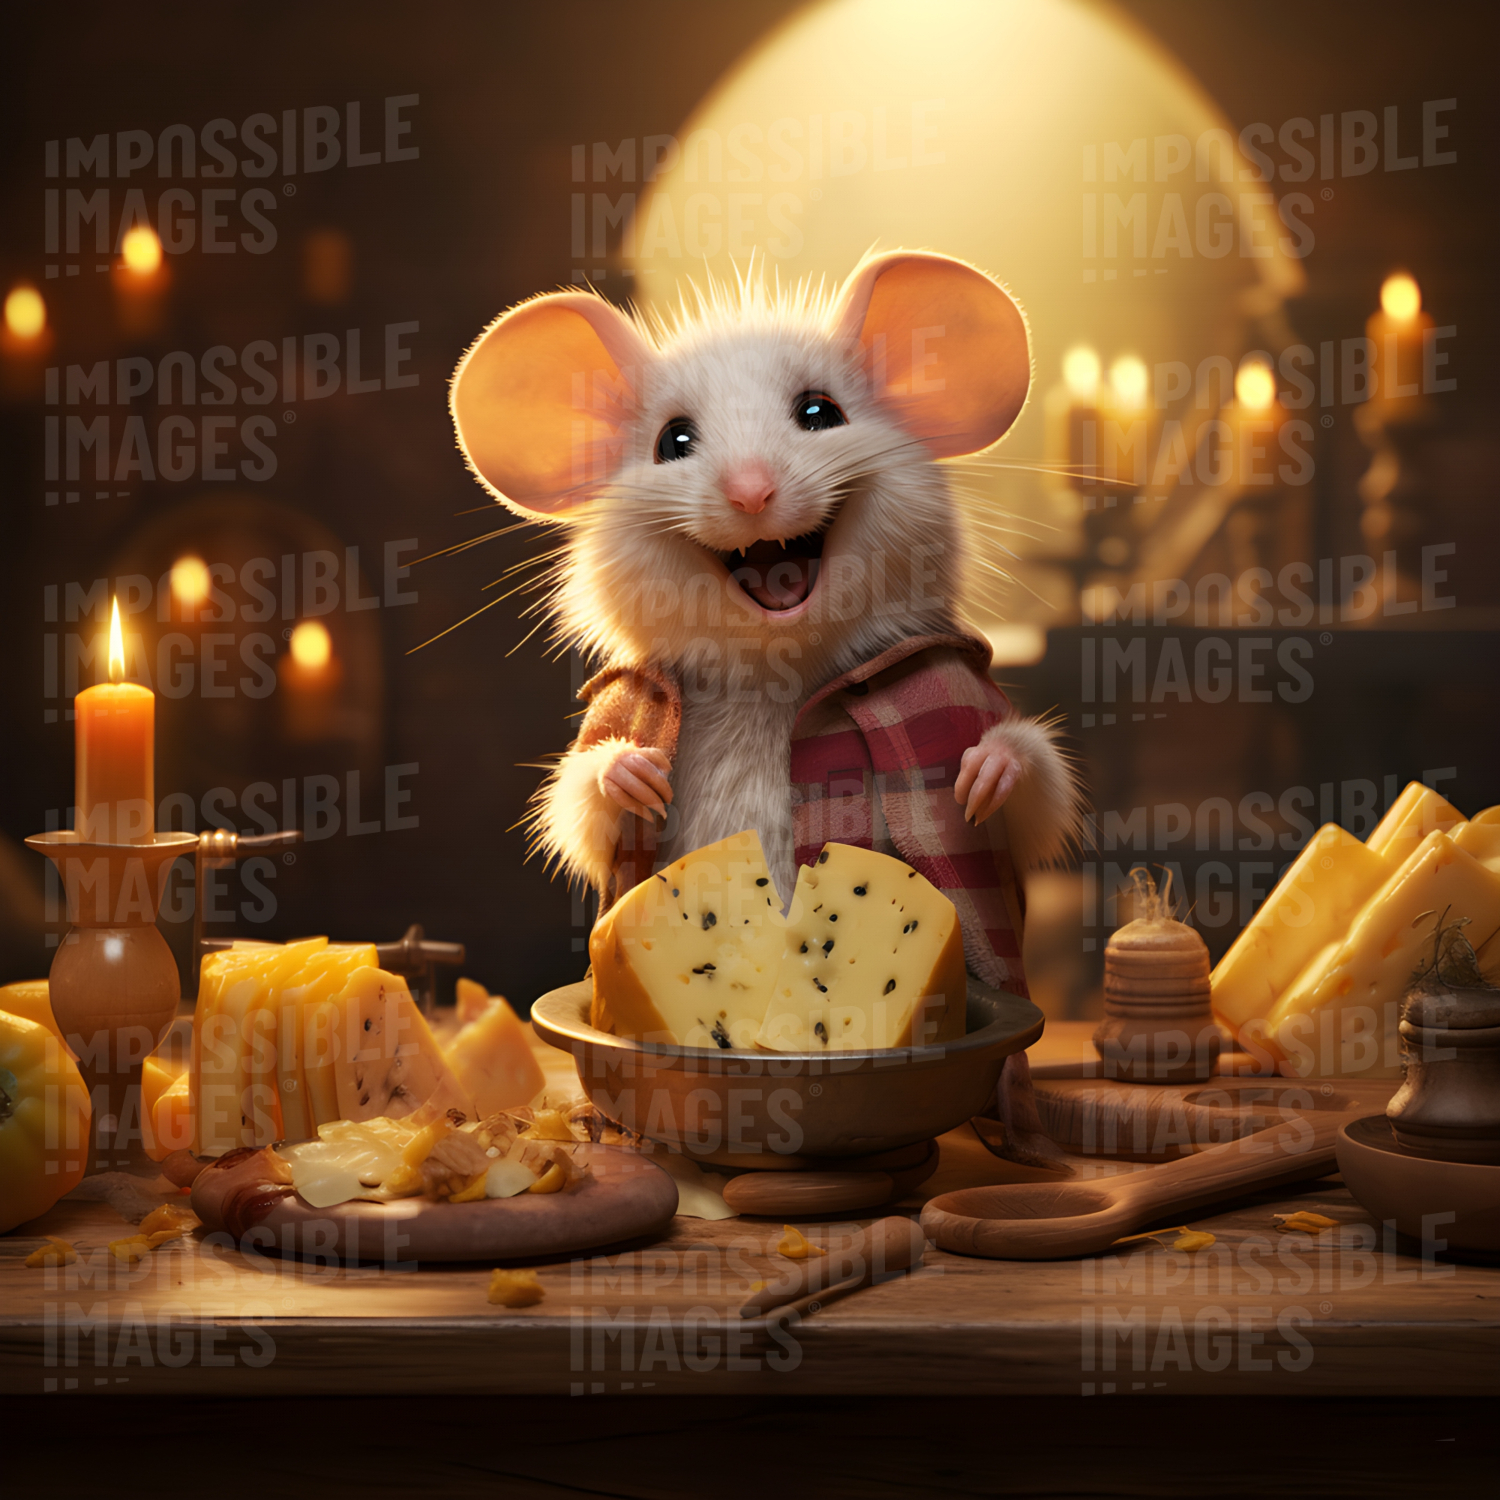 A joyful mouse with a cheeseboard -  A cheerful mouse carrying a board of cheese, smiling with delight at the delicious treat.